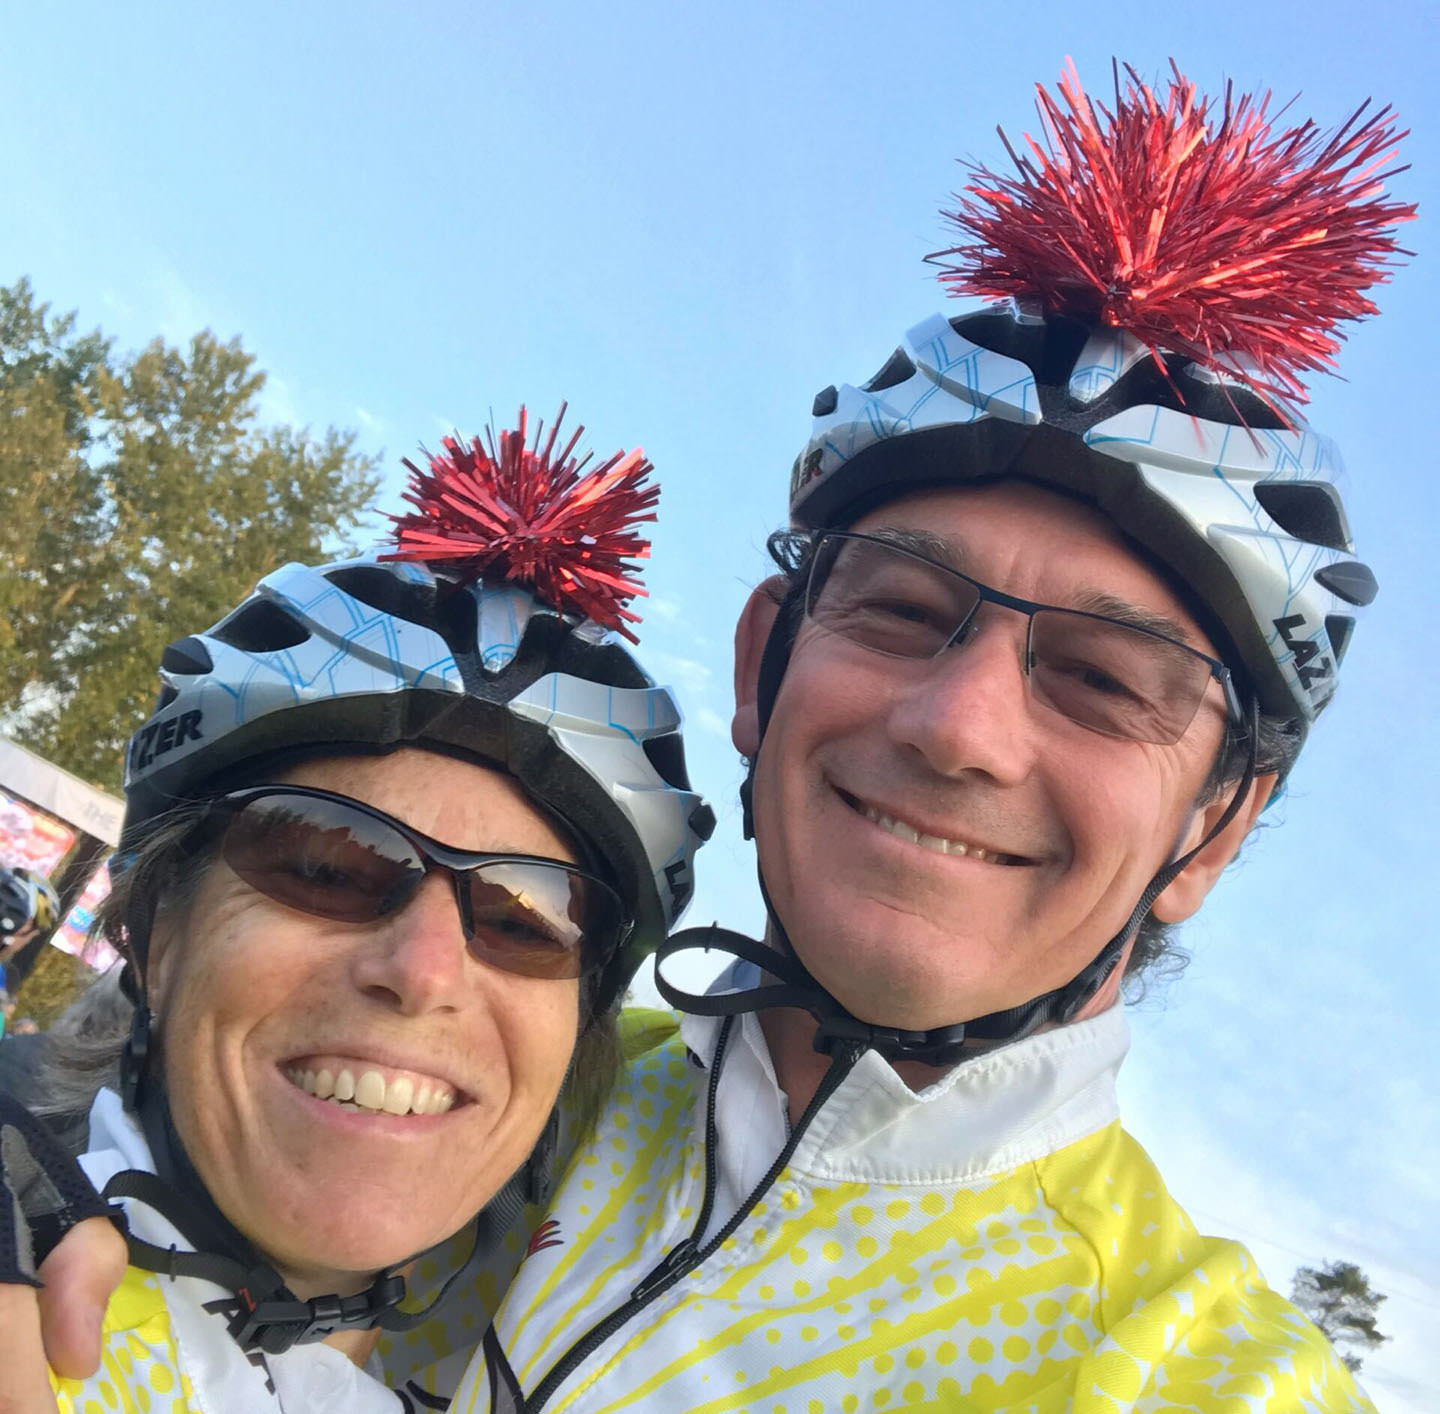 BC Cabinet Minister, Selina Robinson and husband Dan Robinson fundraising for the Tour de Cure